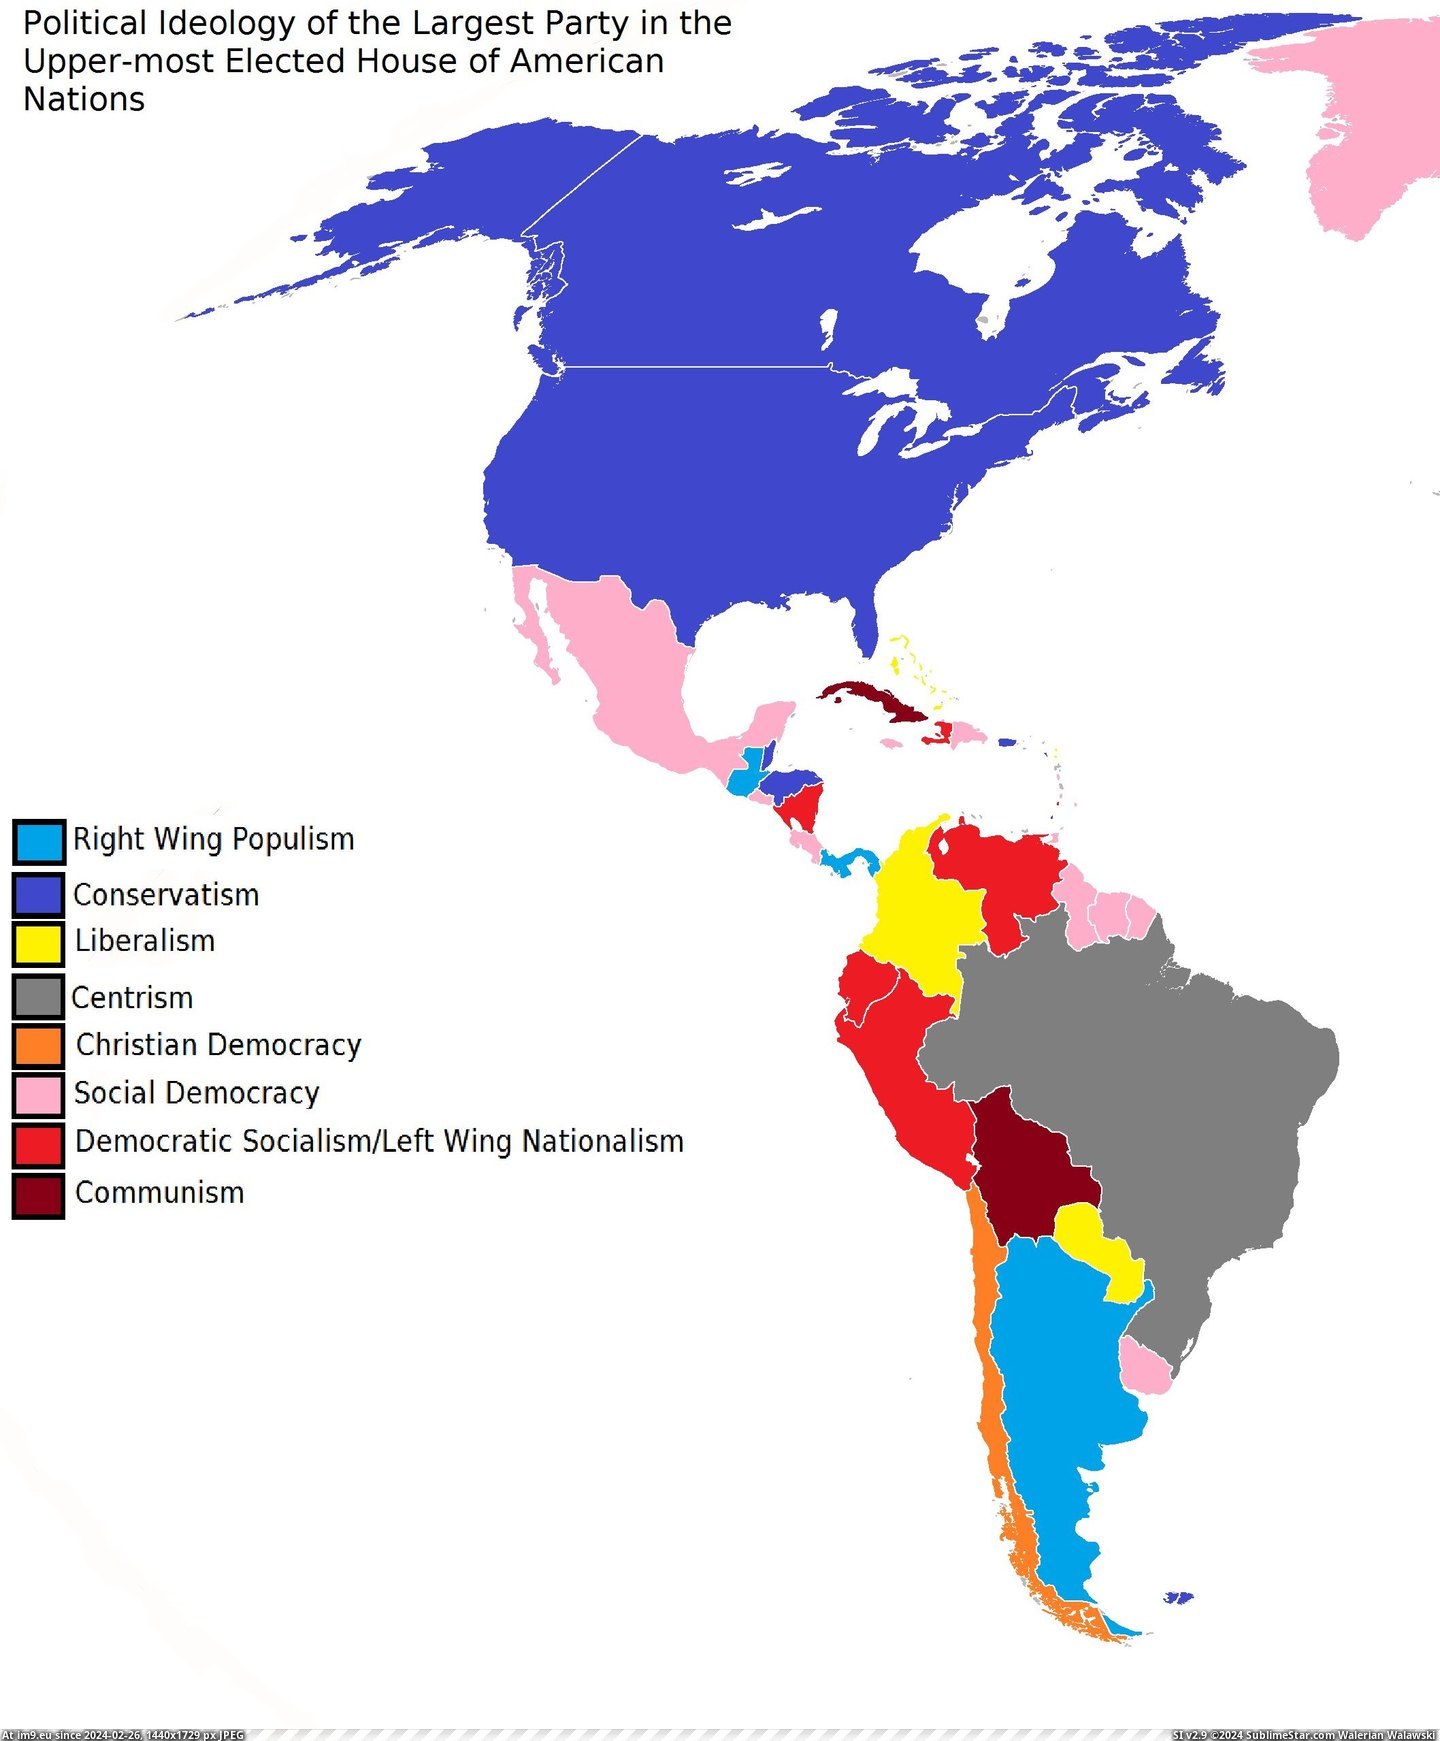 #House #Party #American #Elected #Ideology #Upper #Nations #Political [Mapporn]  Political Ideology of the Largst Party in the Upper-most Elected House of American Nations [2116x2552] Pic. (Obraz z album My r/MAPS favs))